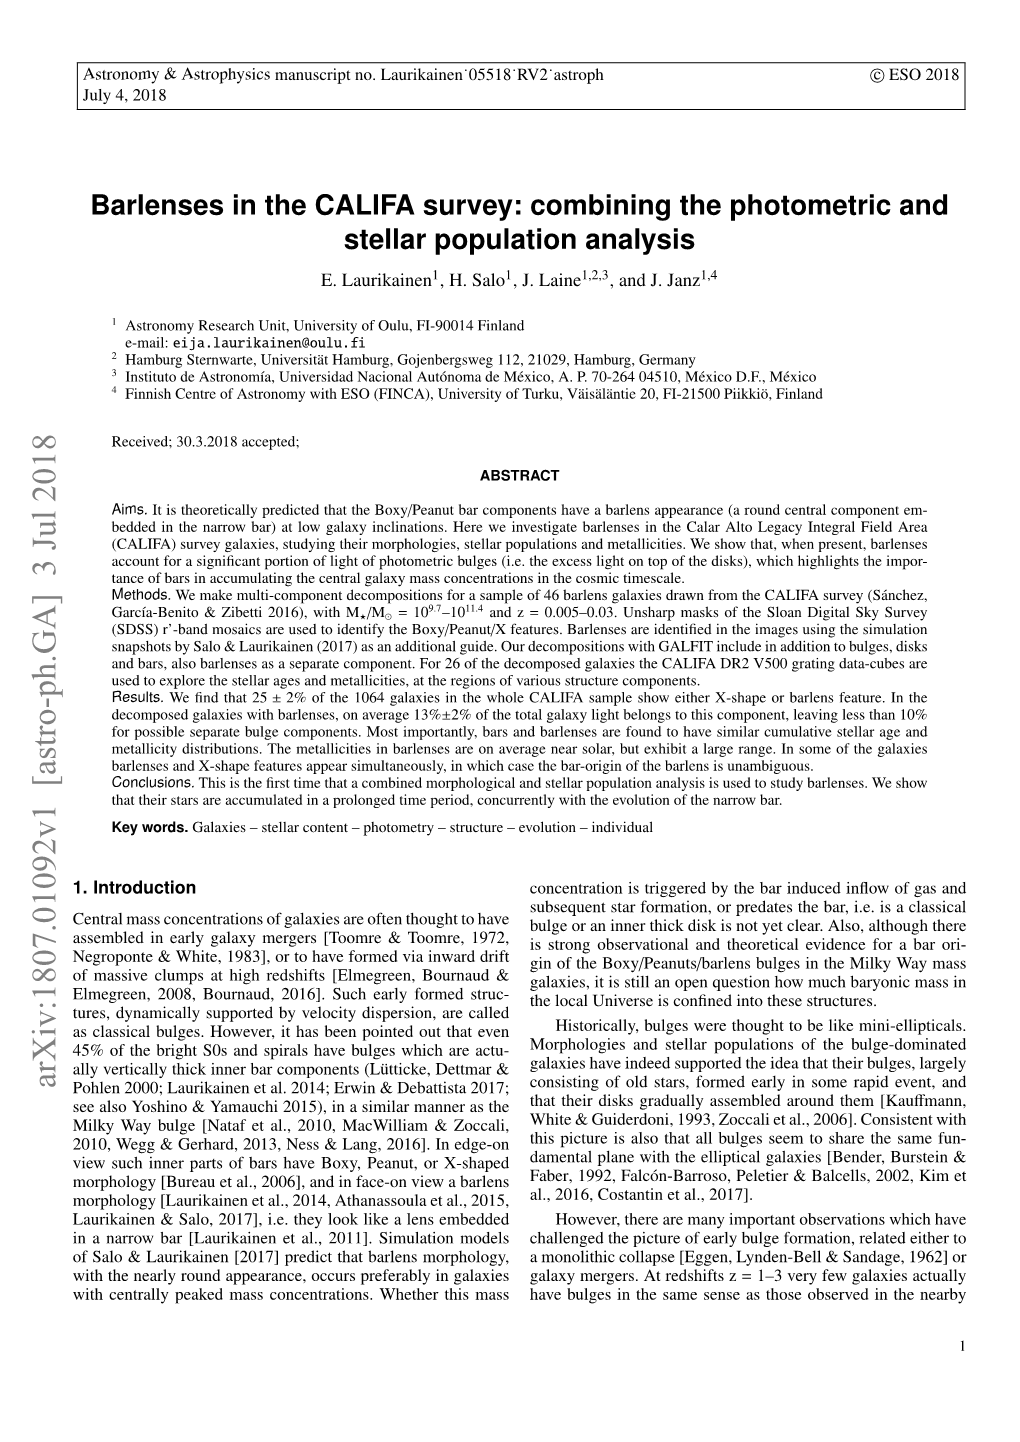 Combining the Photometric and Stellar Population Analysis E